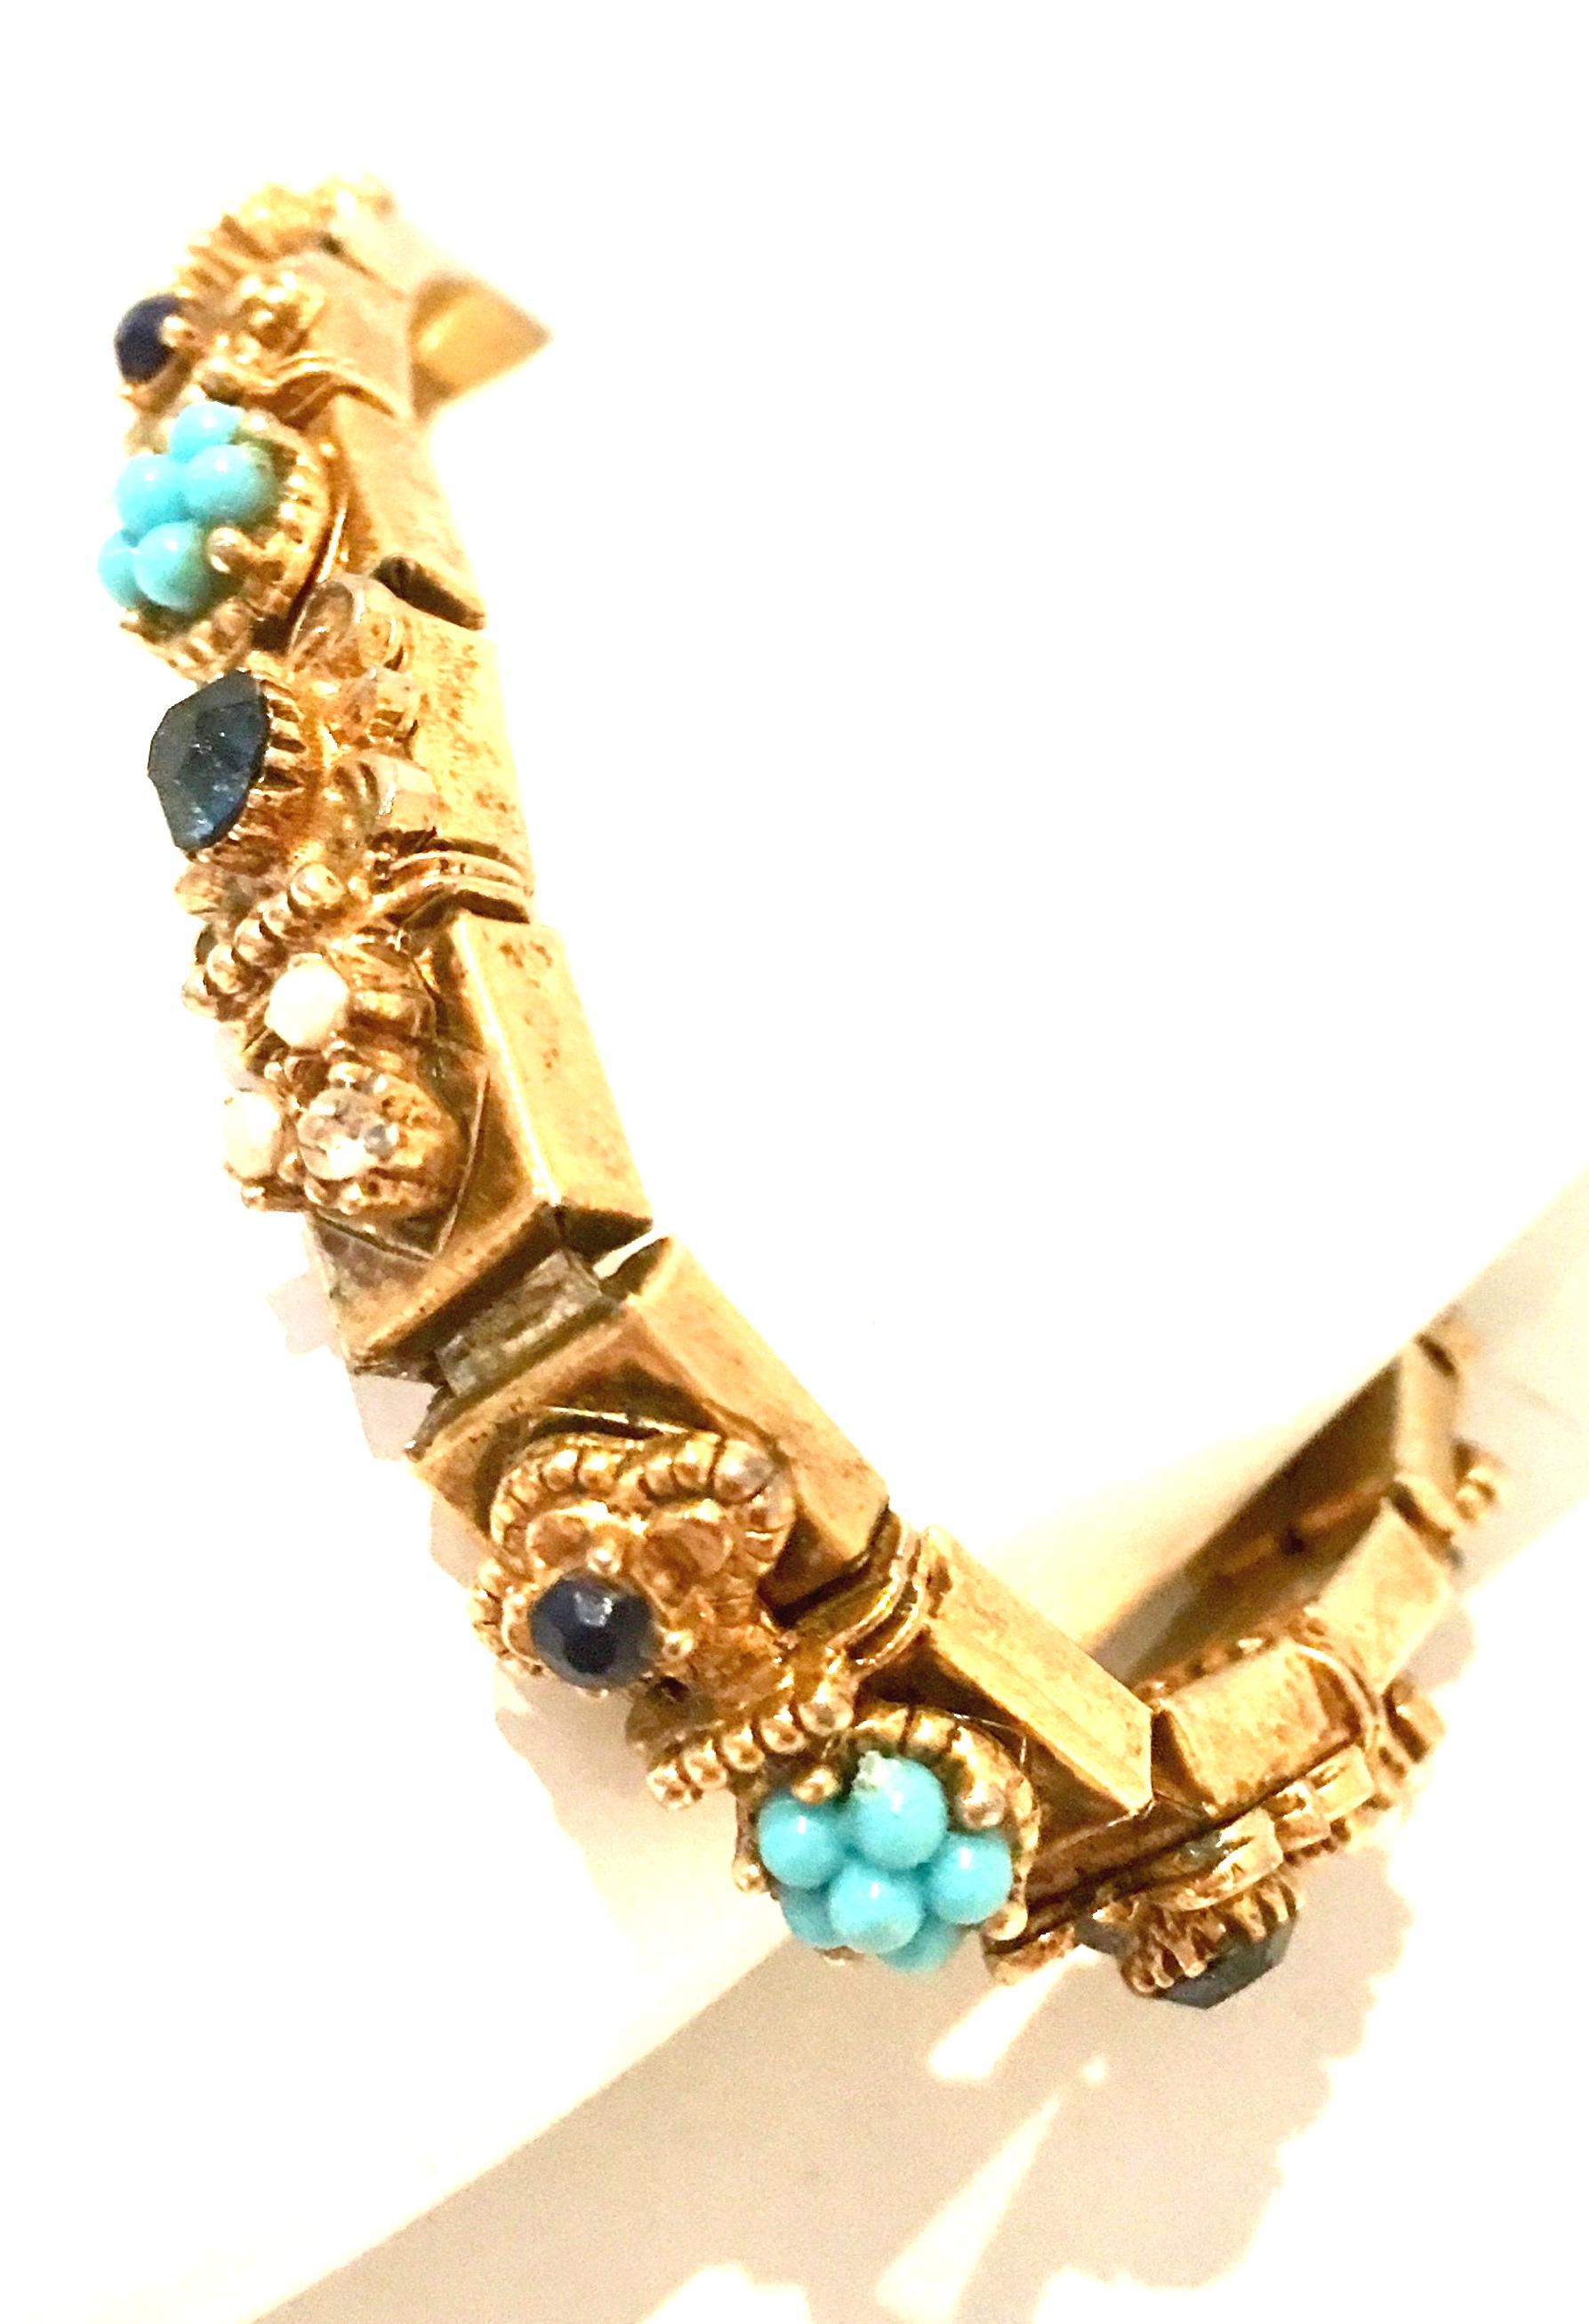 Mid-20th Century Etruscan Style Gold Plate, Austrian Crystal & Bead Link Bracelet.
This unique gold plate seventeen square link bracelet features applied charms of faux pearl and turquoise beads as well as Austrian crystal blue sapphire stones. The